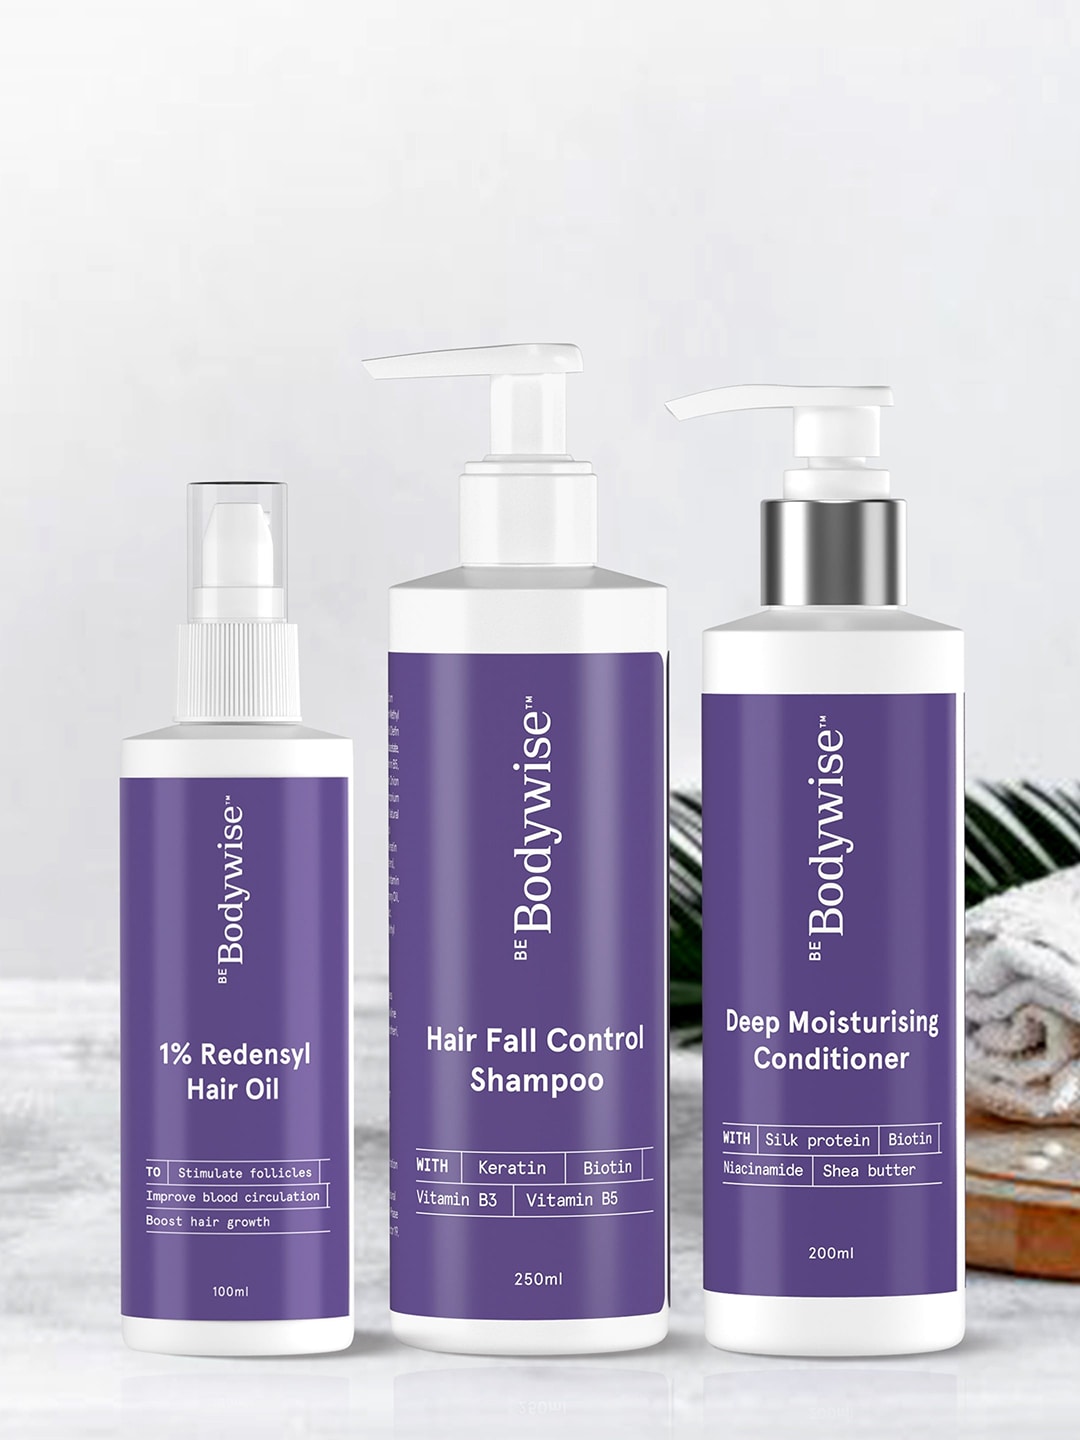 Be Bodywise Hair Fall Reduction Pack with Hair Oil, Shampoo & Conditioner Price in India